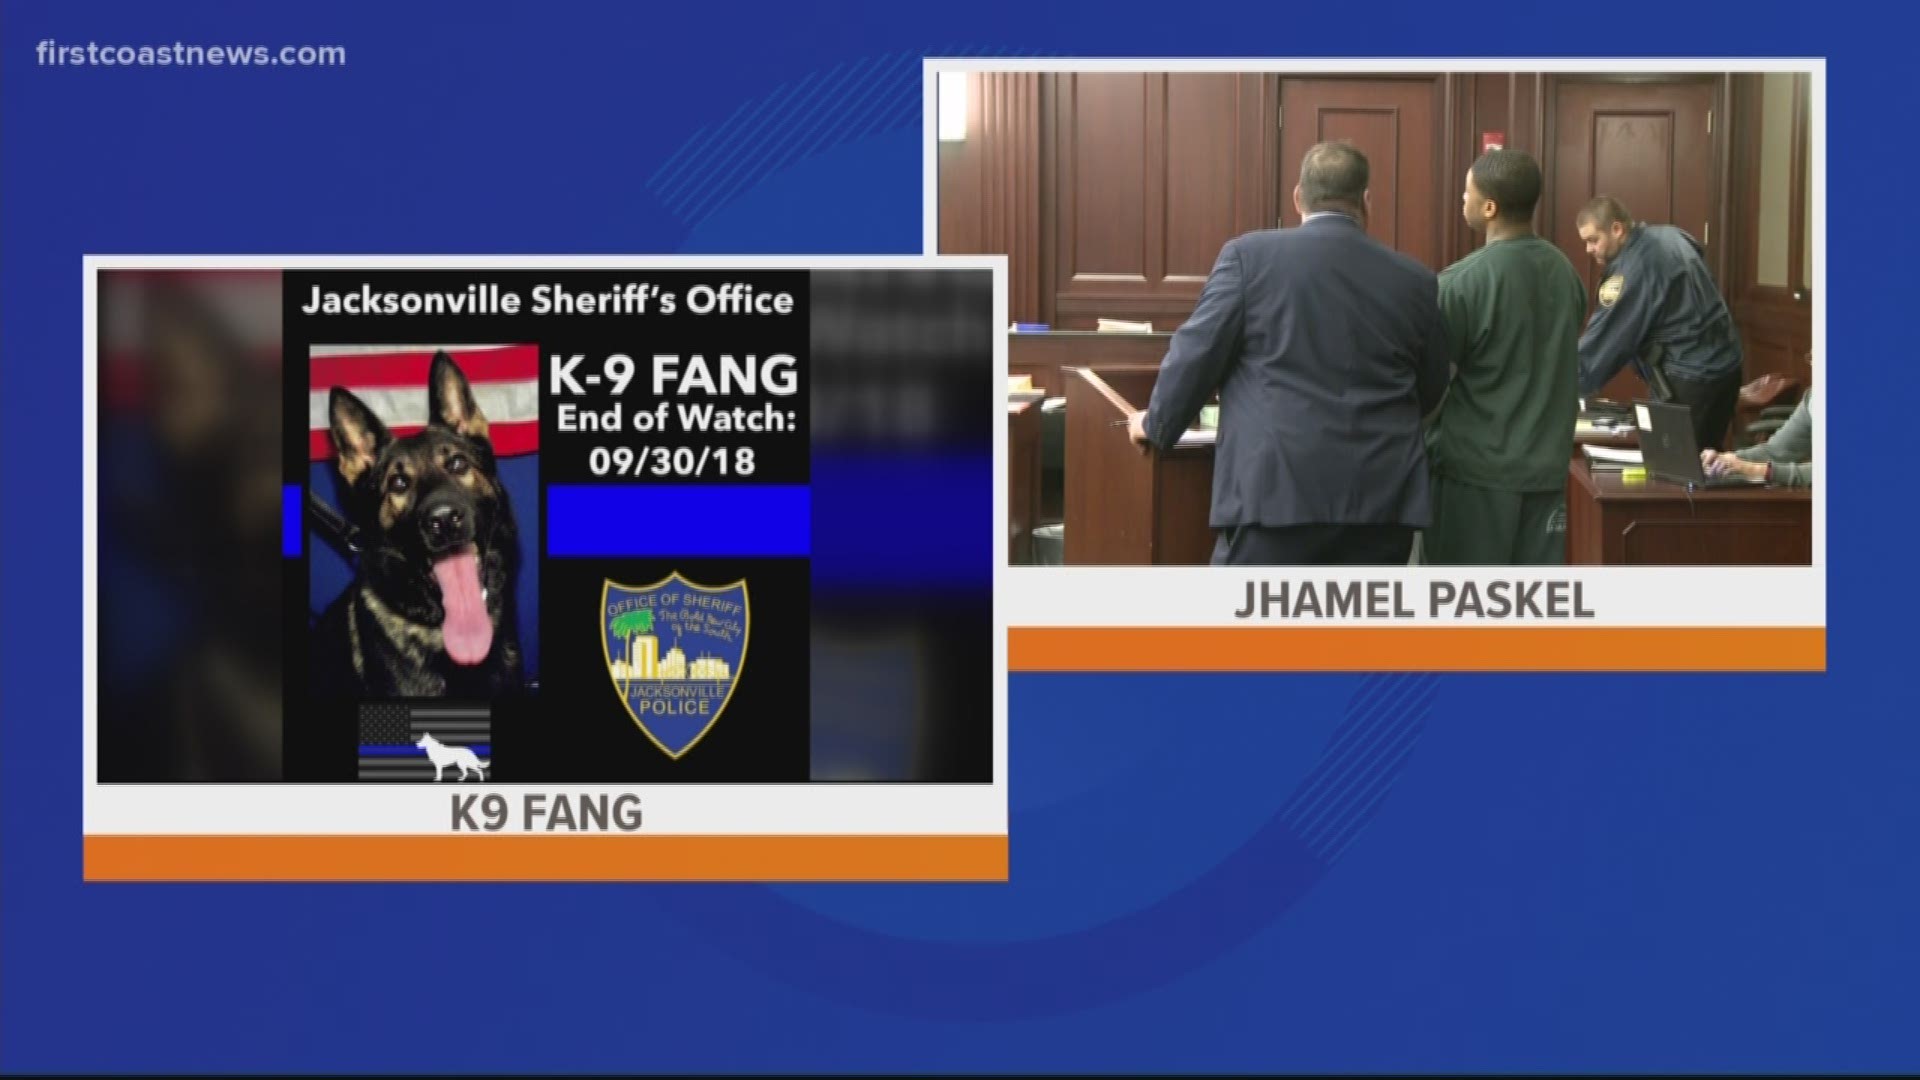 Jhamel Paskel, who was just 17 at the time of the crime, is being charged as an adult for two counts of armed kidnapping, armed robbery and killing a police dog.